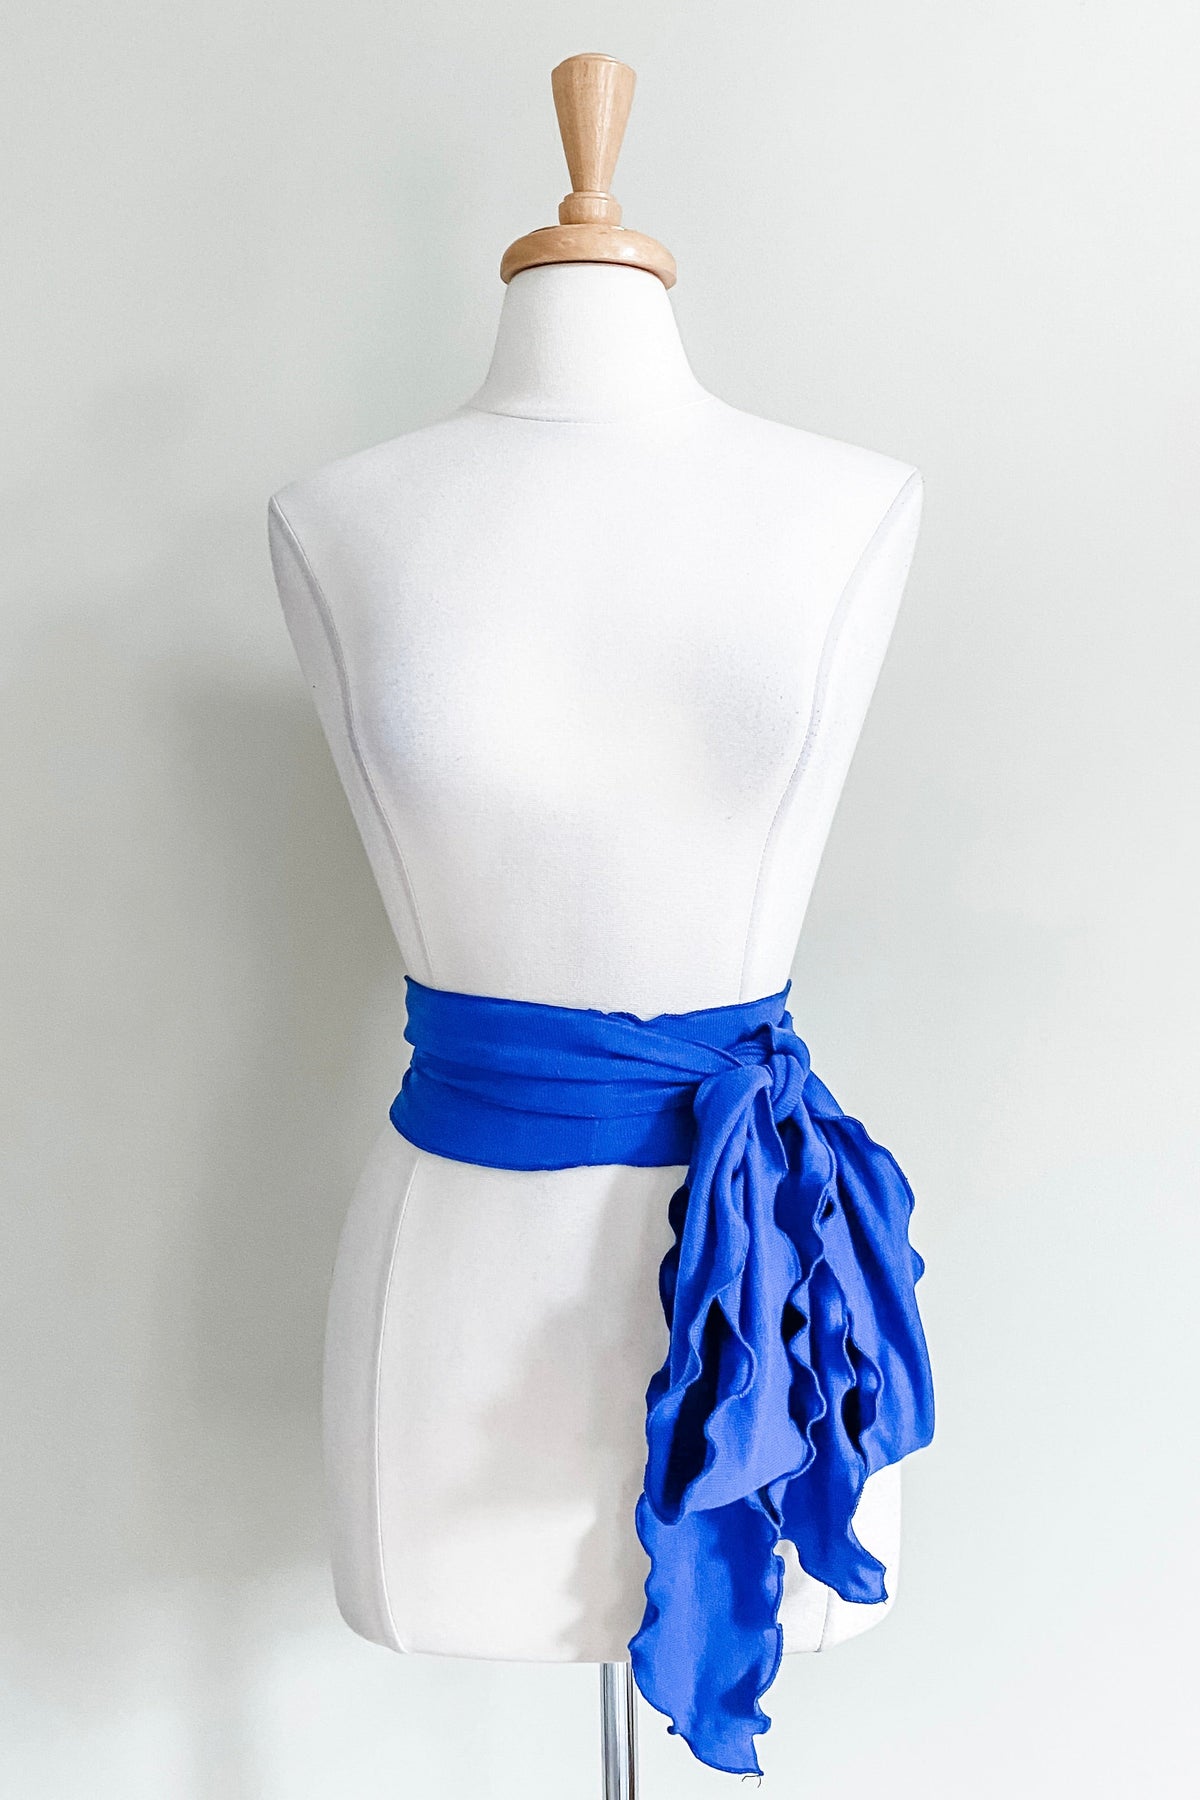 Matching Sash in Royal color from Diane Kroe